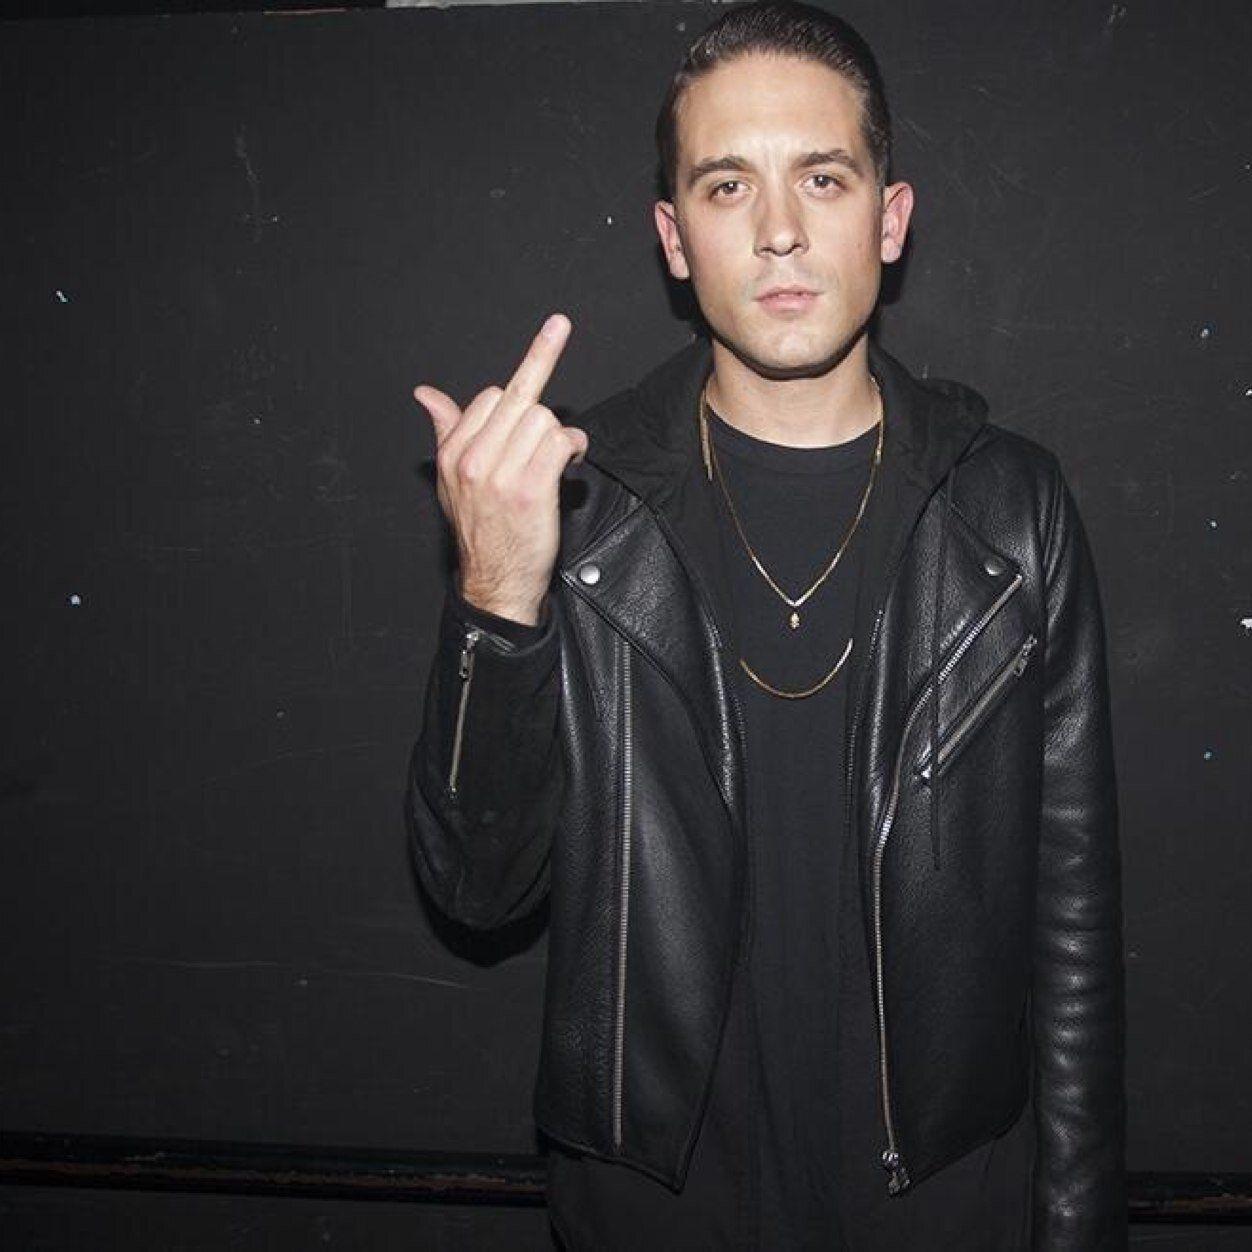 G Eazy HQ Wallpaper. Full HD Picture